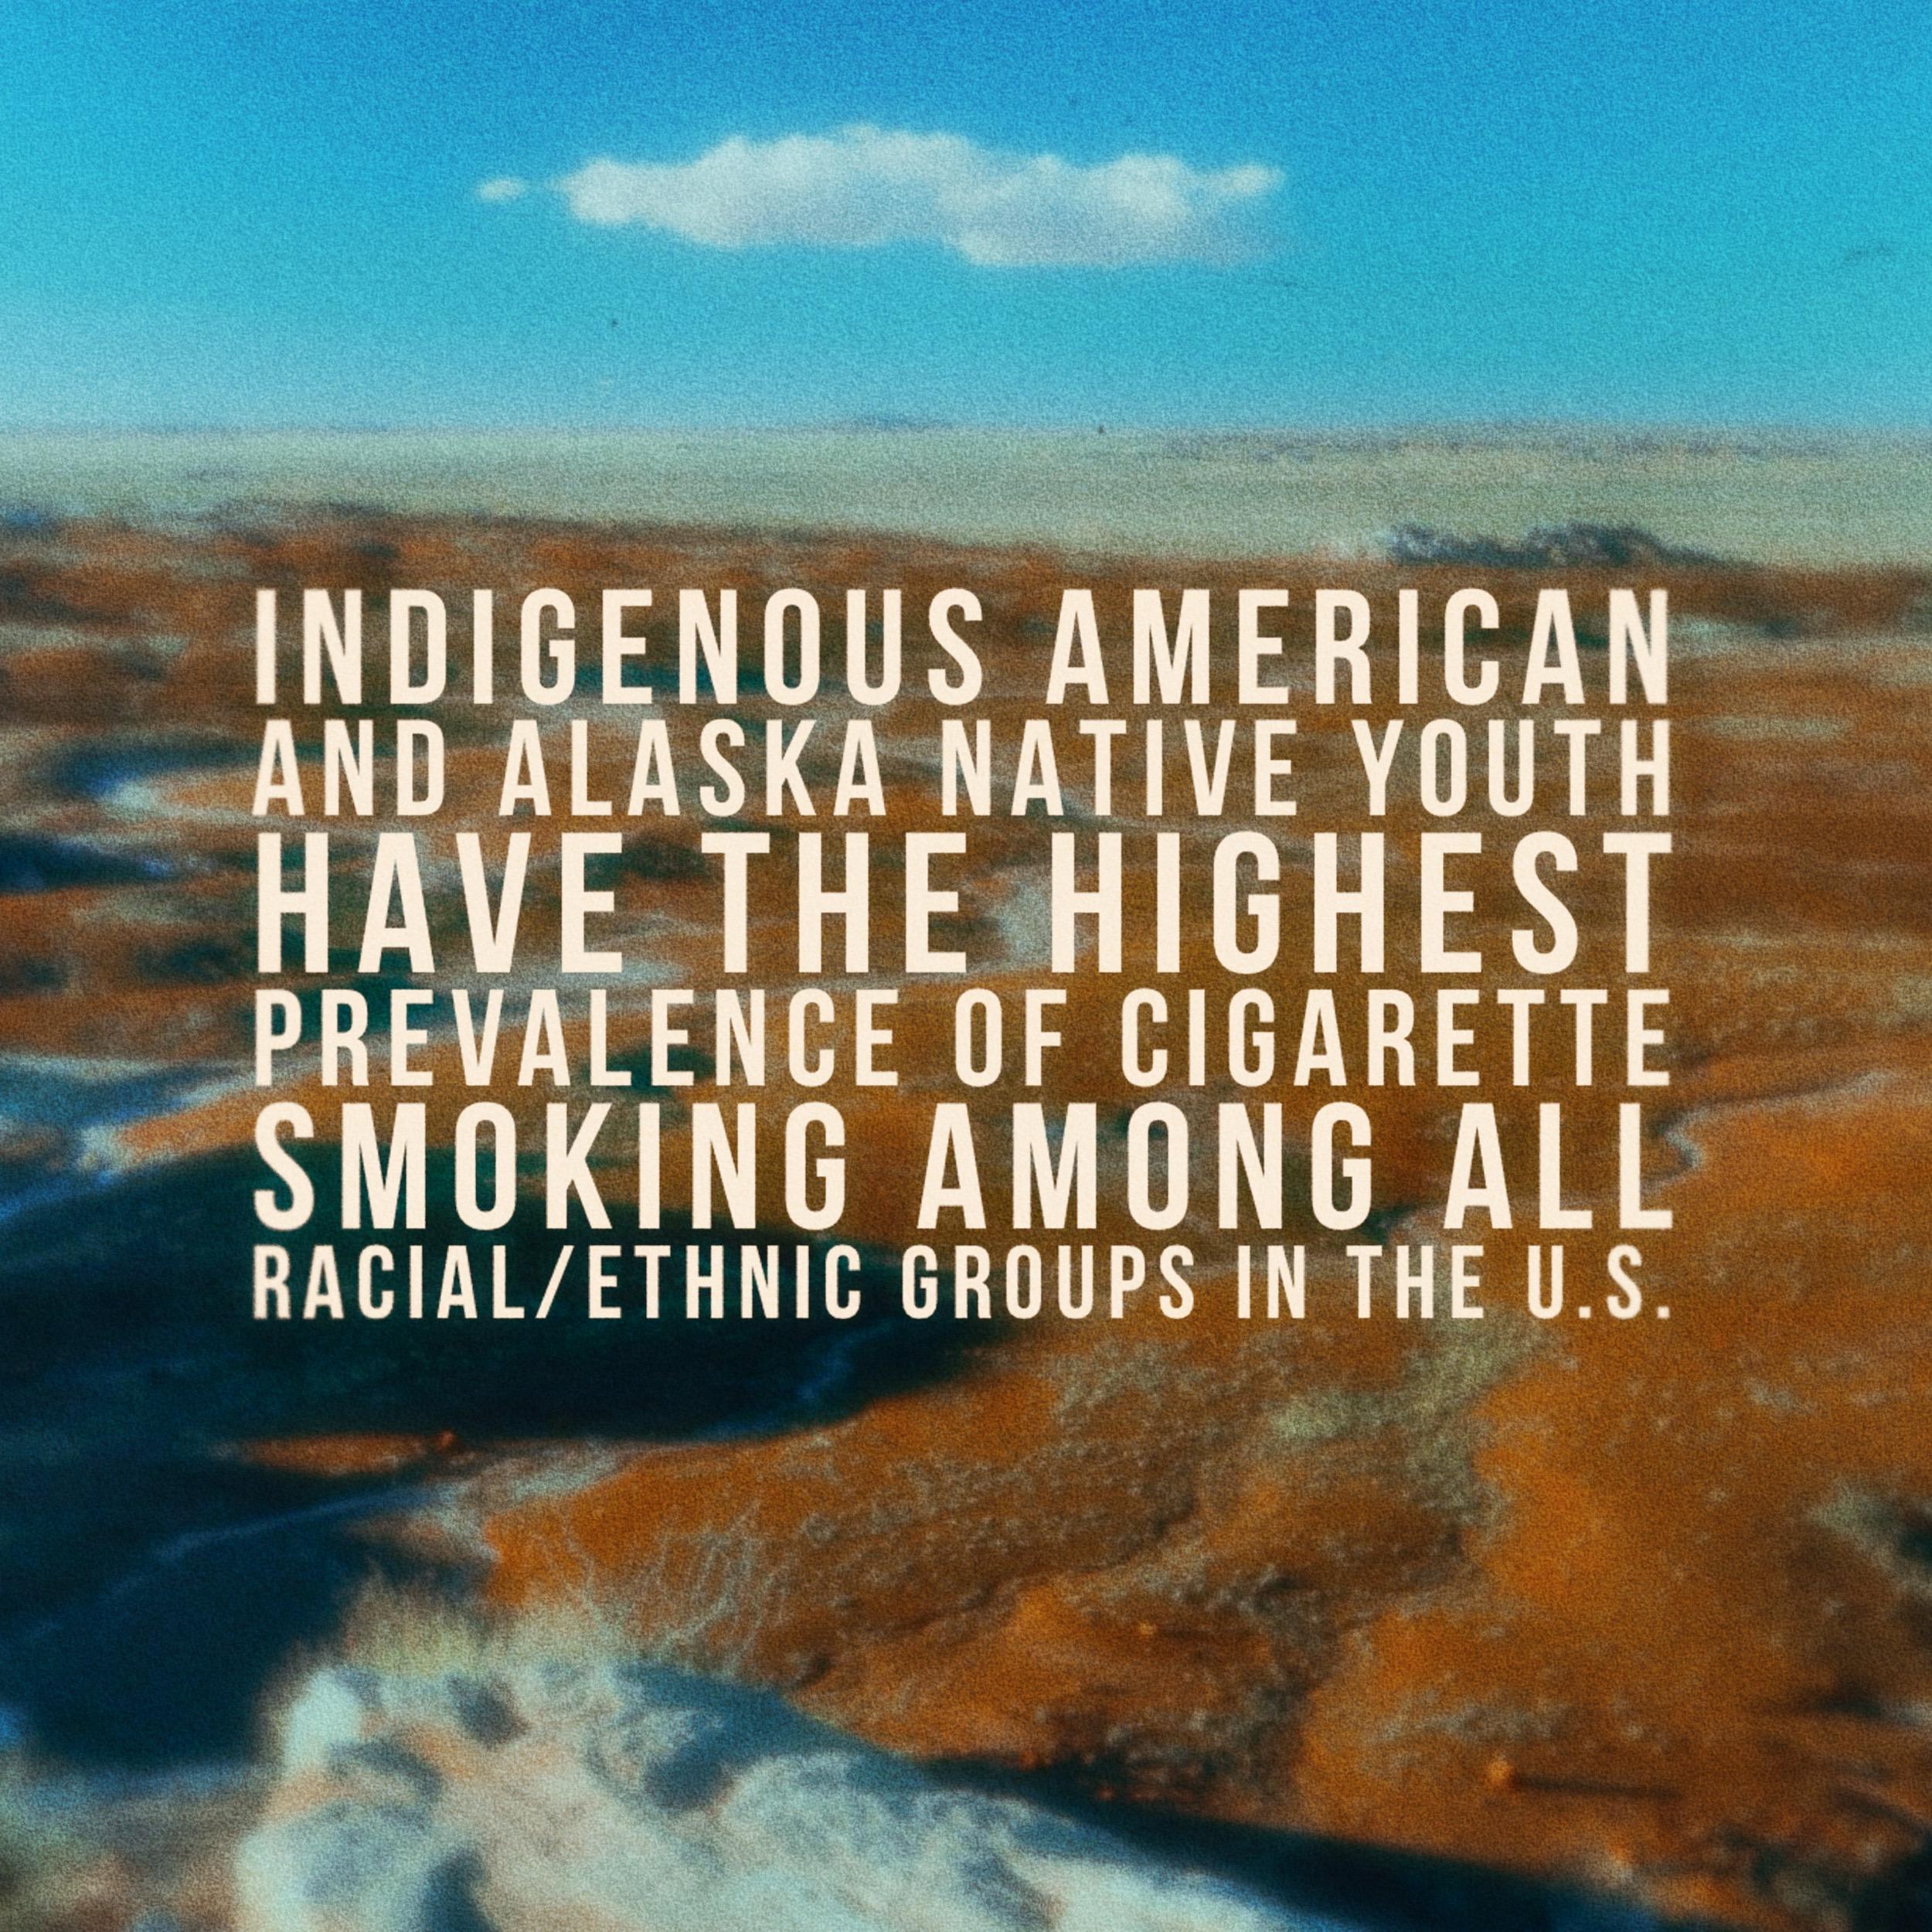 Indigenous American and Alaska Native Youth have the highest prevalence of cigarette smoking among all racial/ethnic groups in the United States.